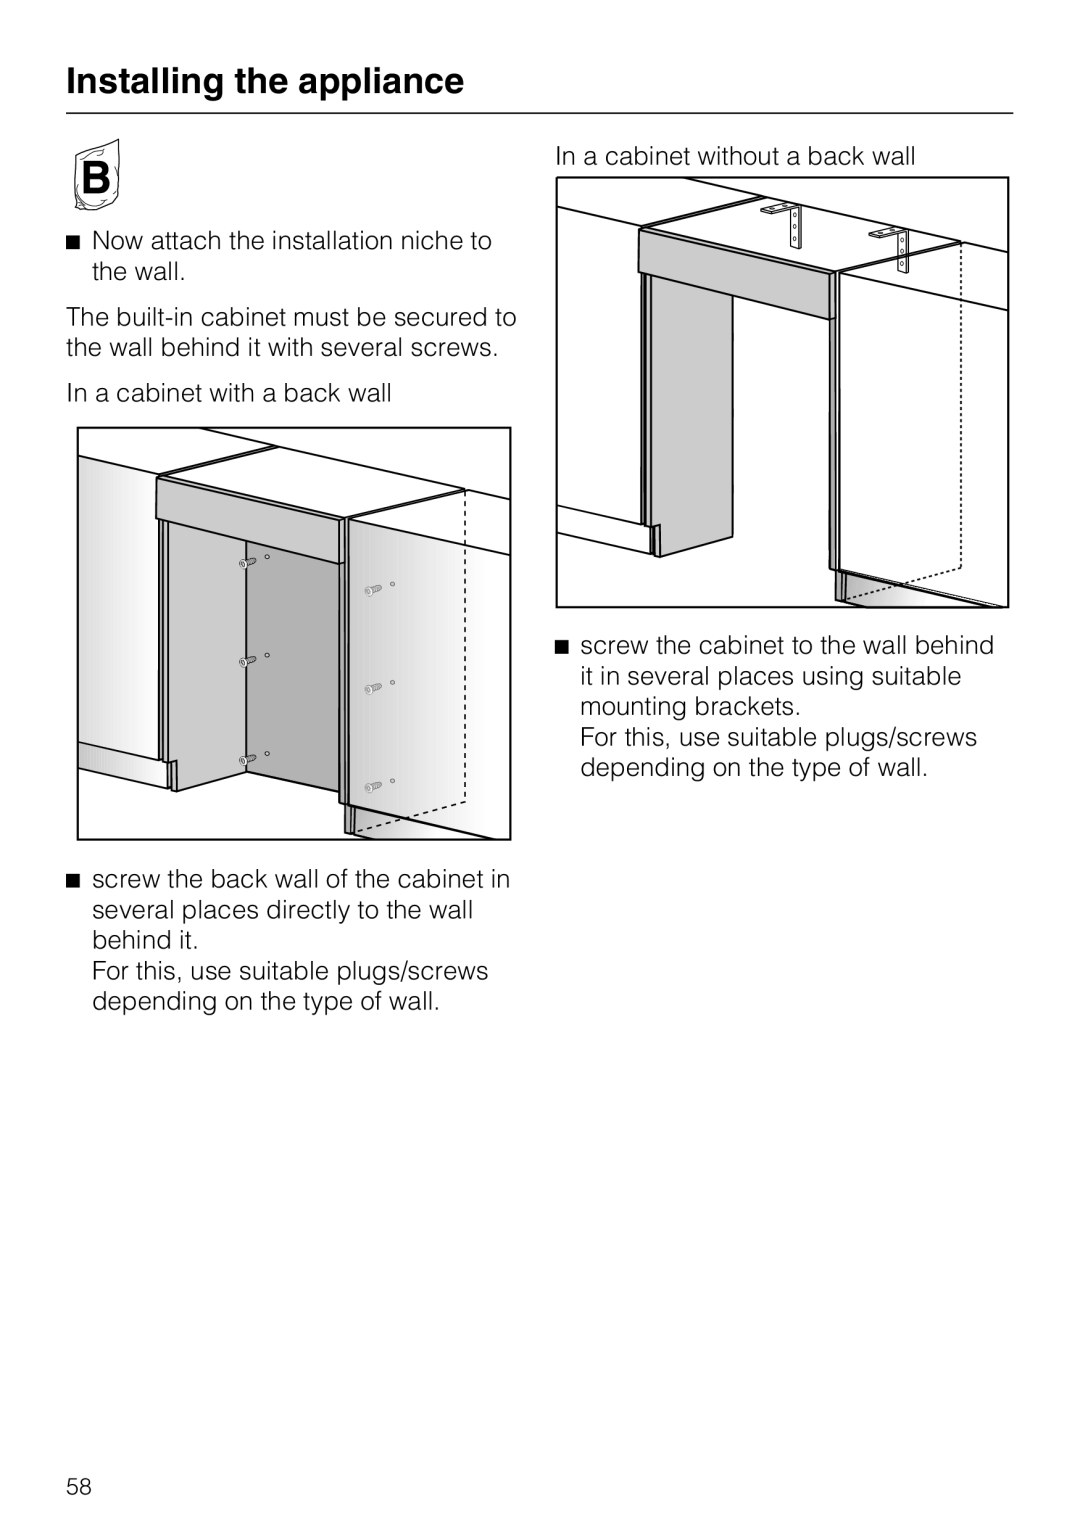 Miele F 1411 SF installation instructions Installing the appliance, Now attach the installation niche to the wall 